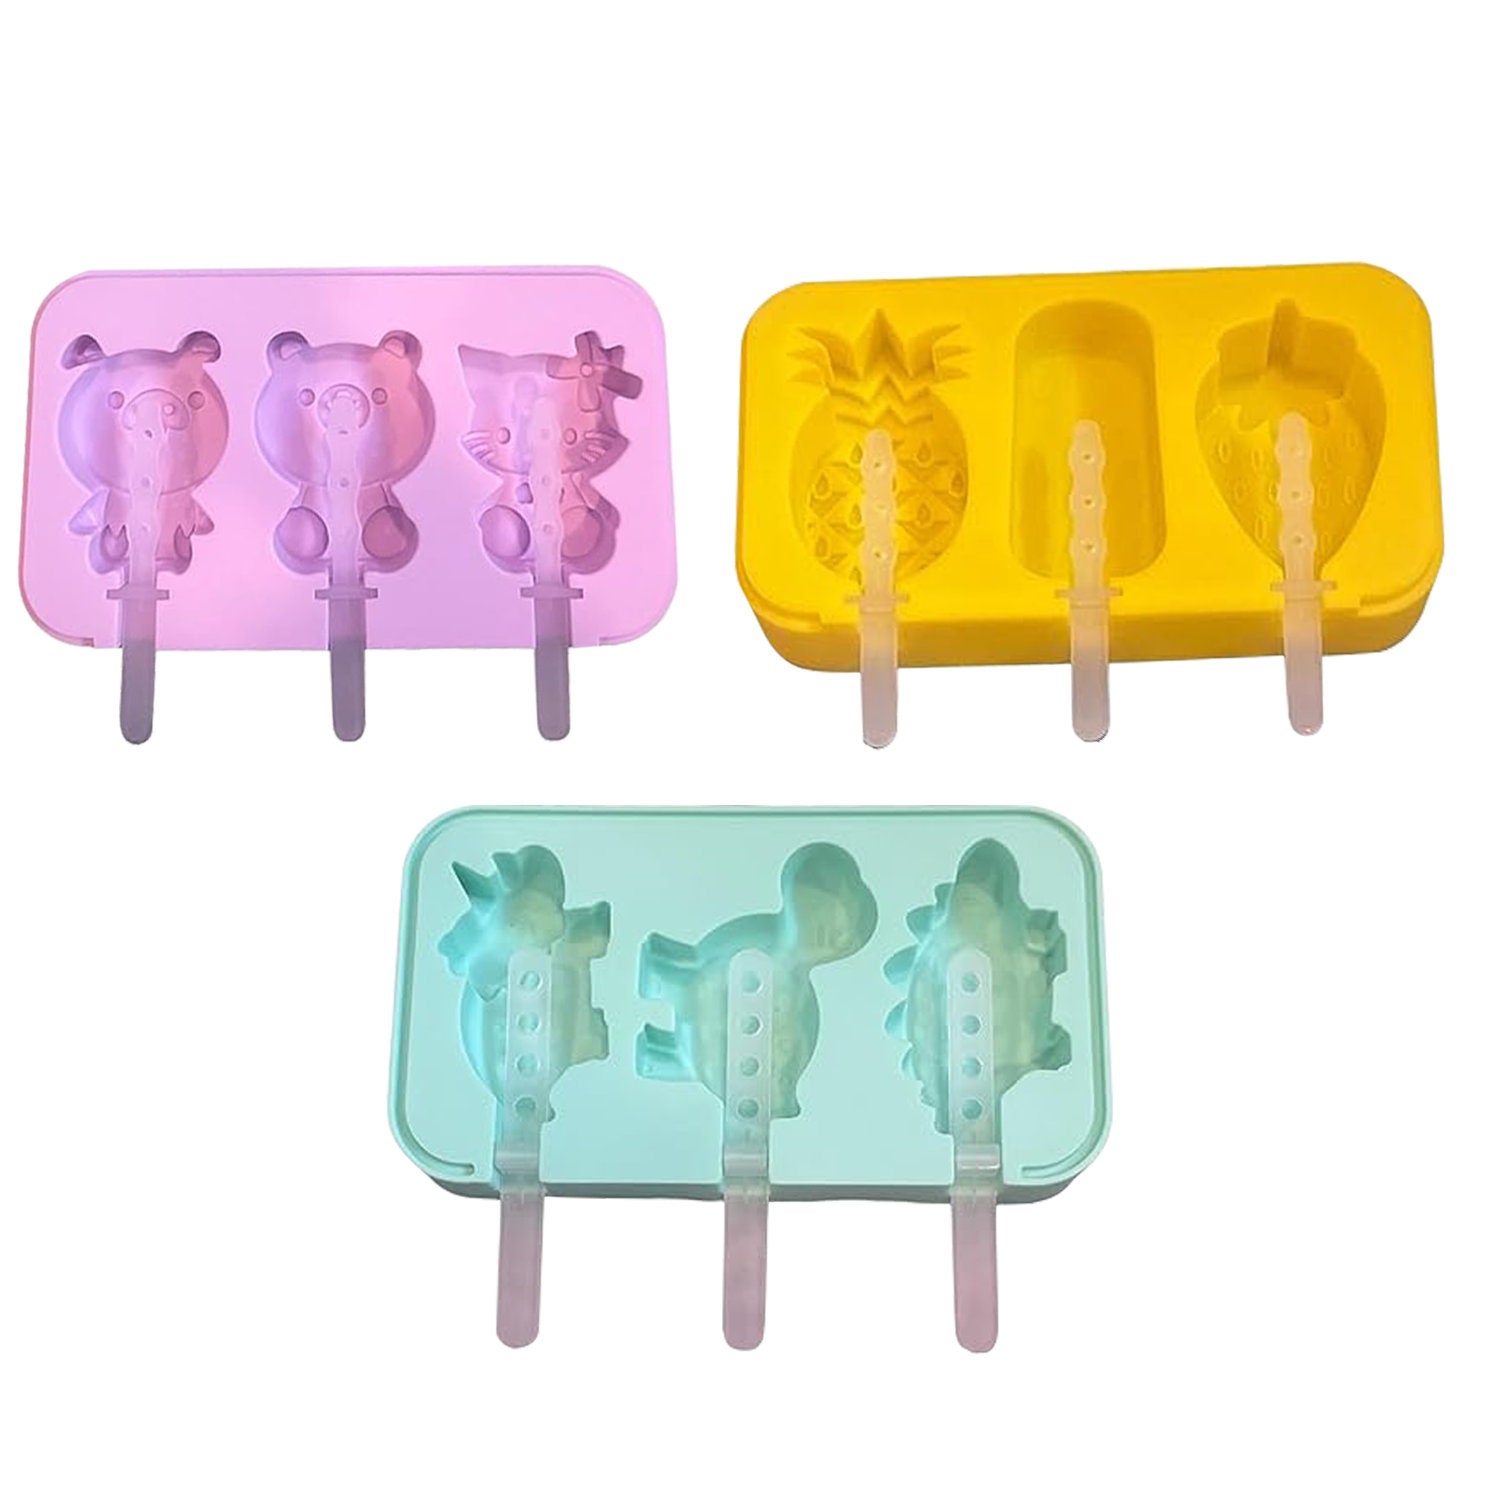 Popsicle Molds, Cakesilce Mold,silicone Popsicle Molds, Popsicle Mold 12  Pieces 50 Popsicle Sticks pink -  Denmark